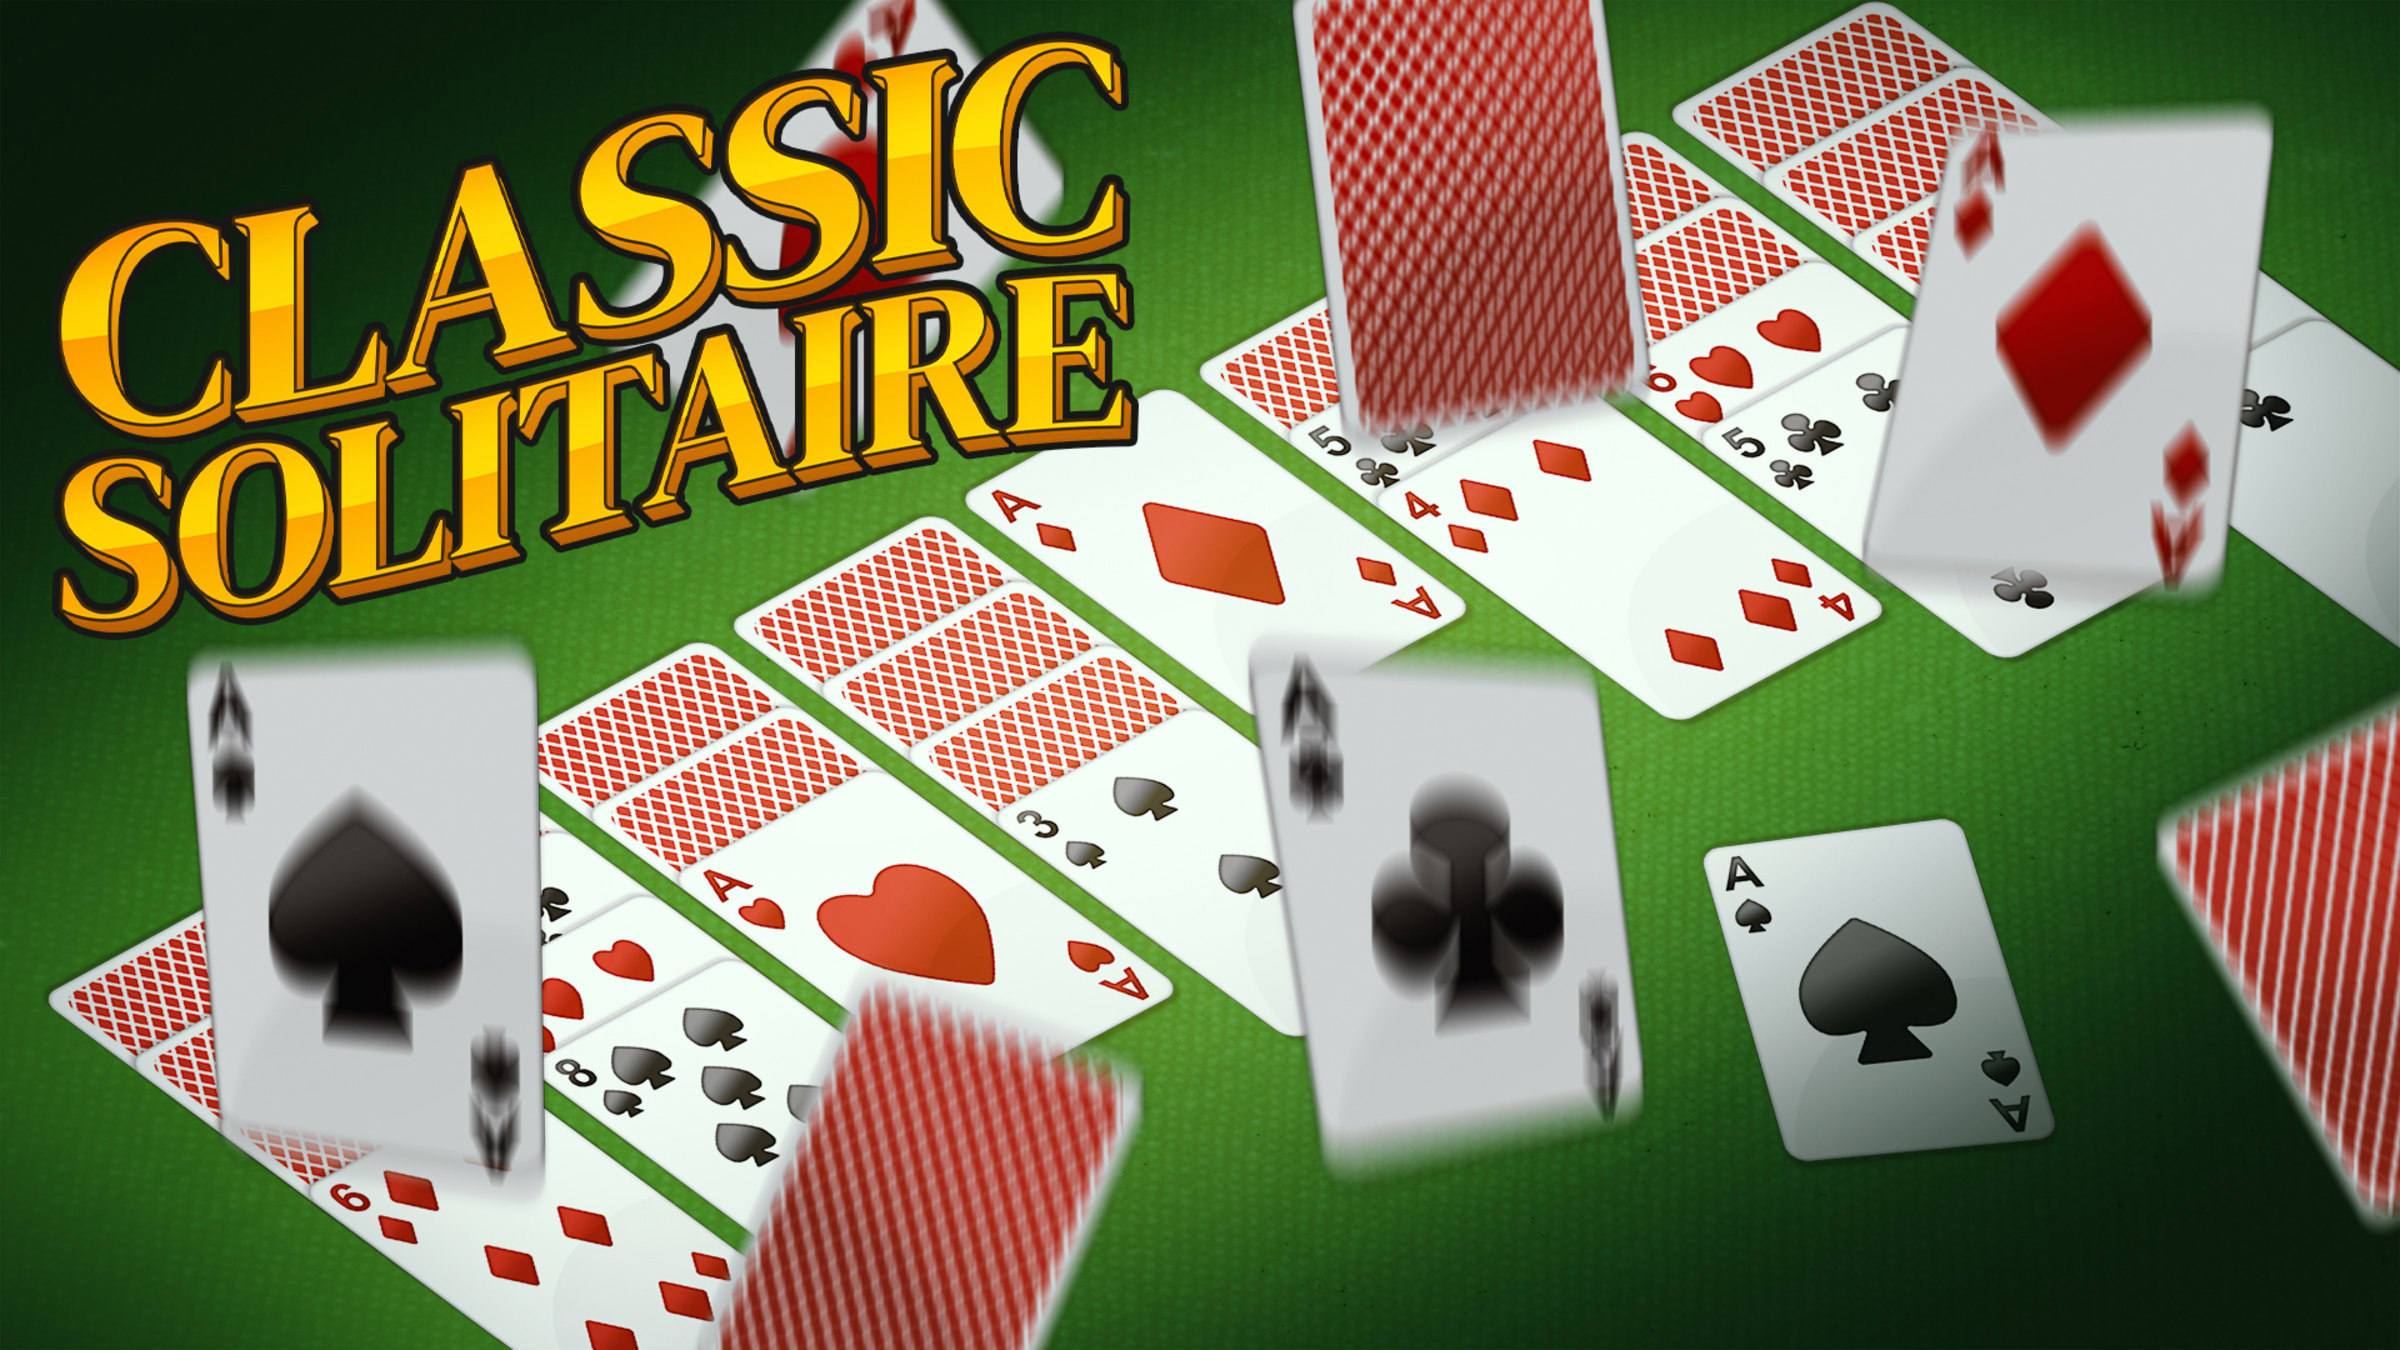 Solitaire - classic solitaire card games